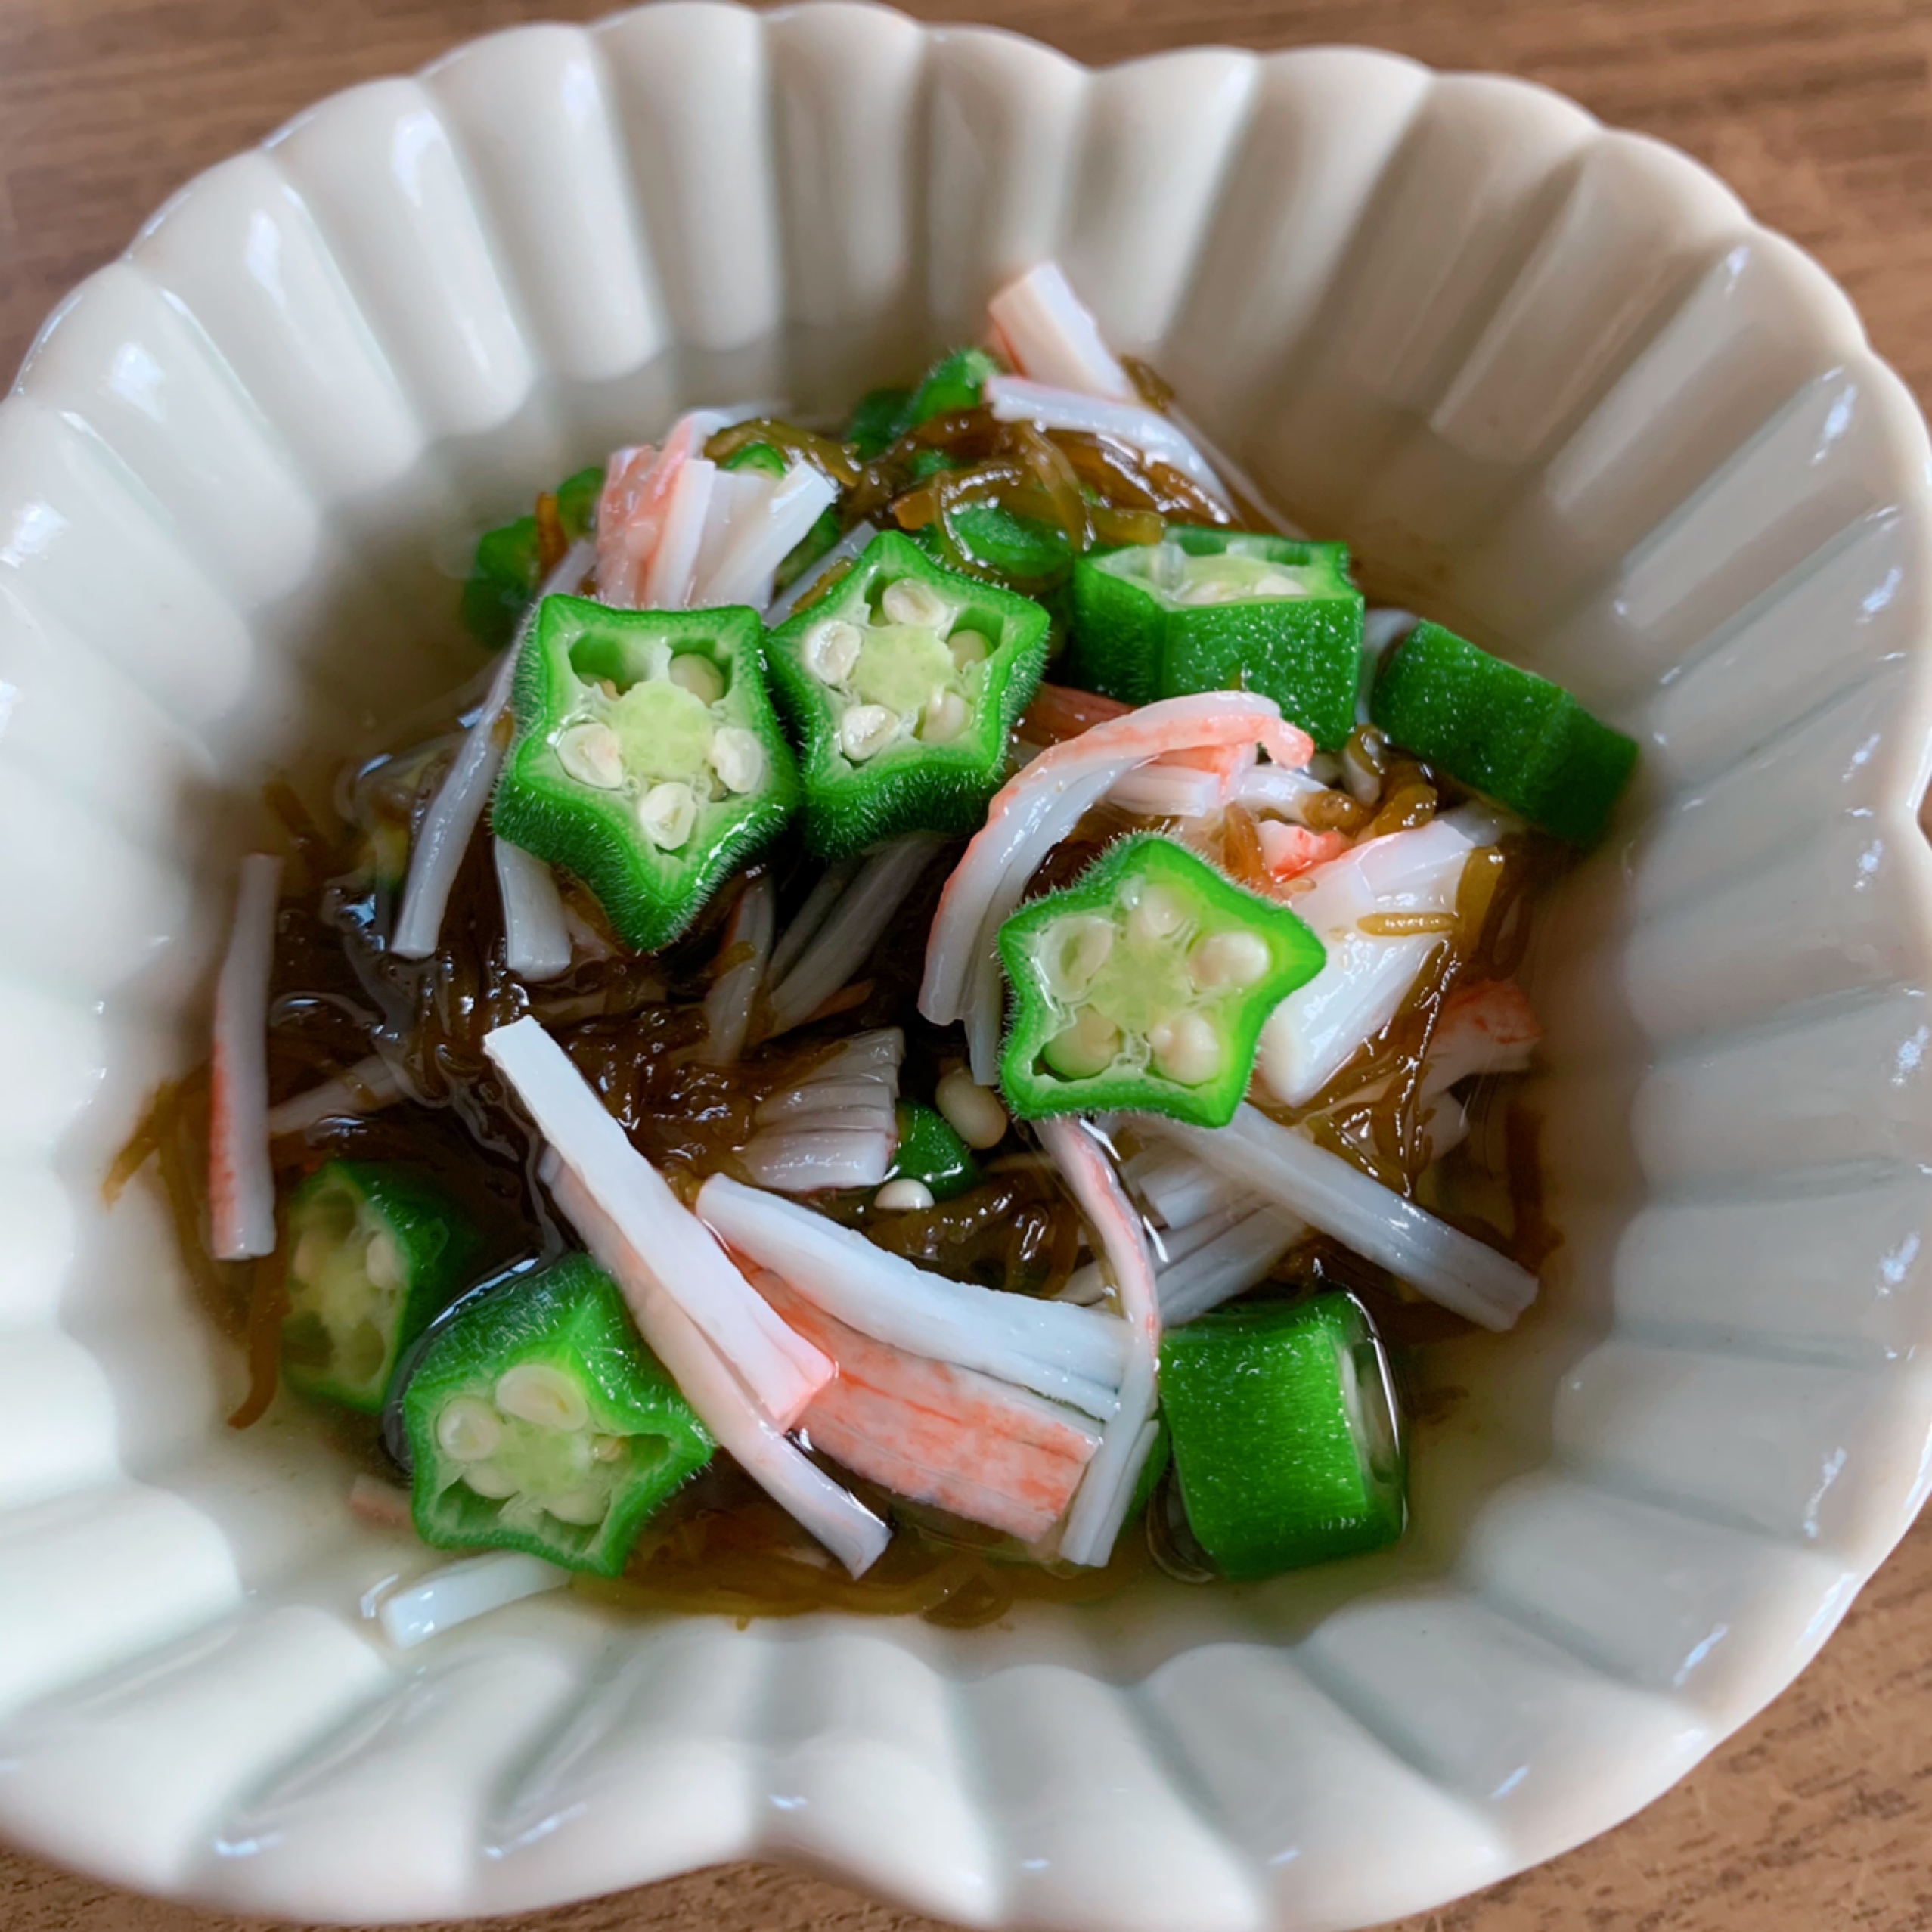 This is a dish of okra and mozuku marinated in sweet vinegar. 